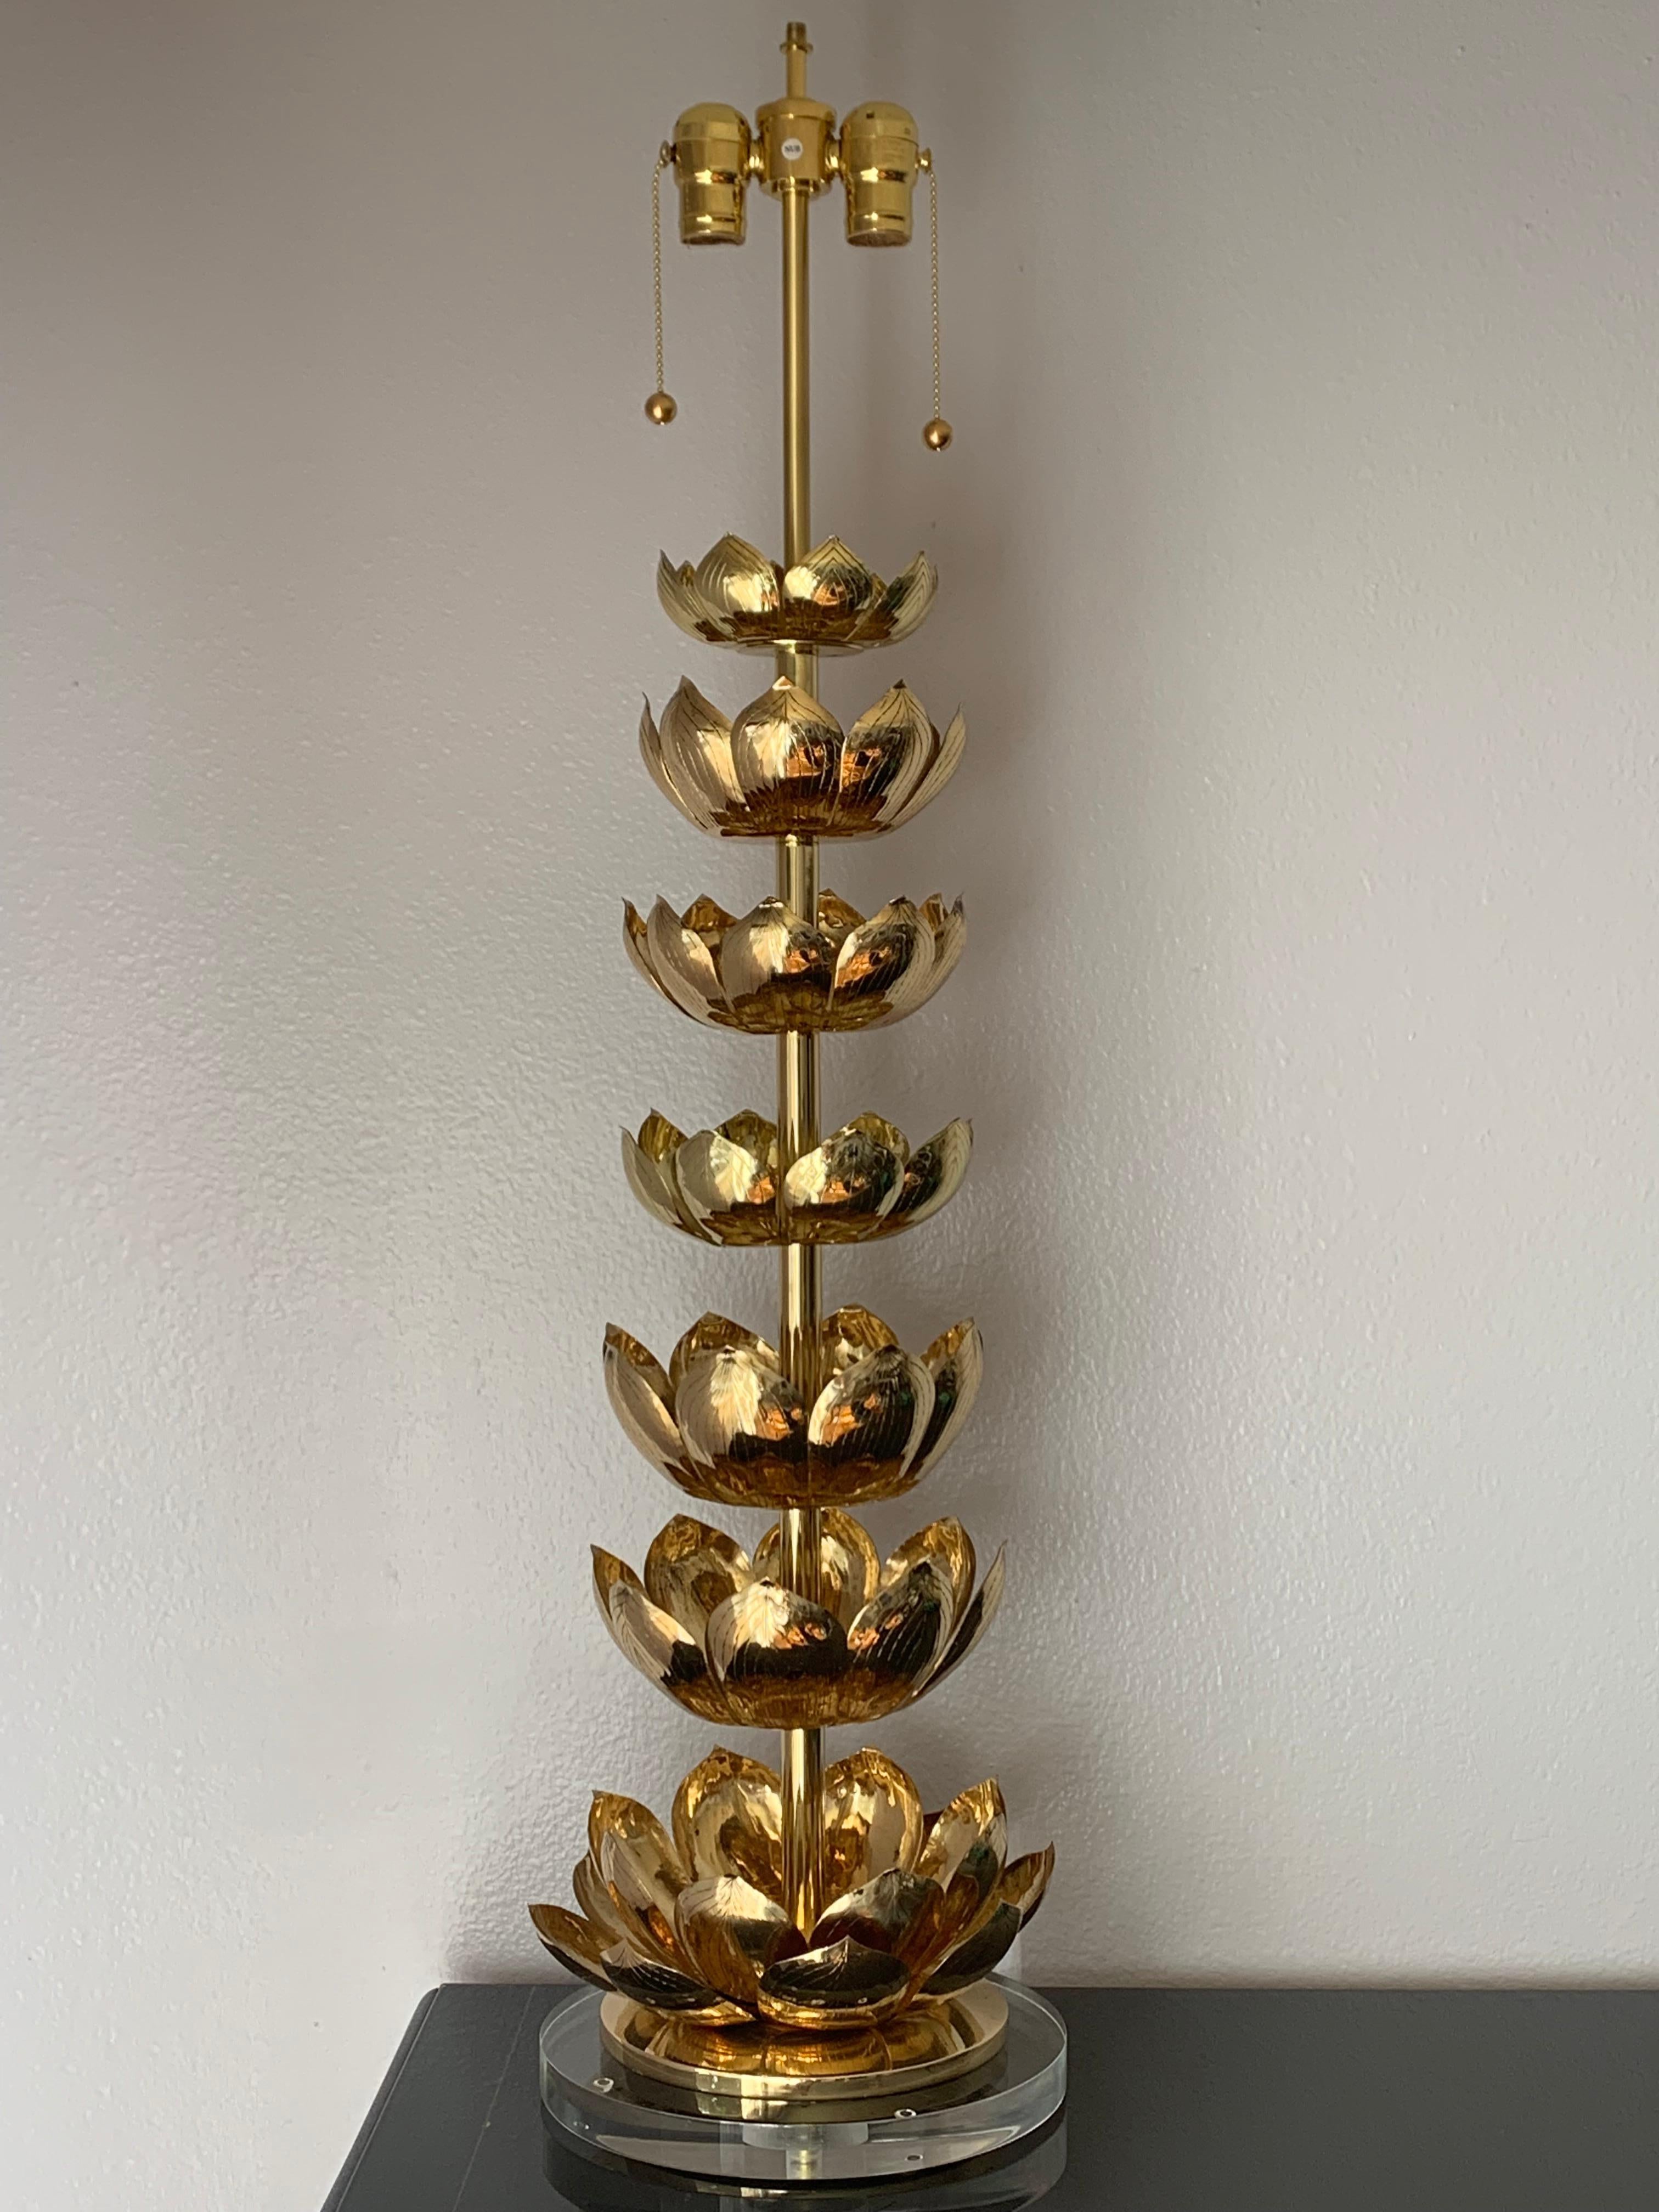 Brass lotus lamp attributed to Feldman. Recently polished and mounted on acrylic base. Requires two up to 60watt E27 base bulbs.